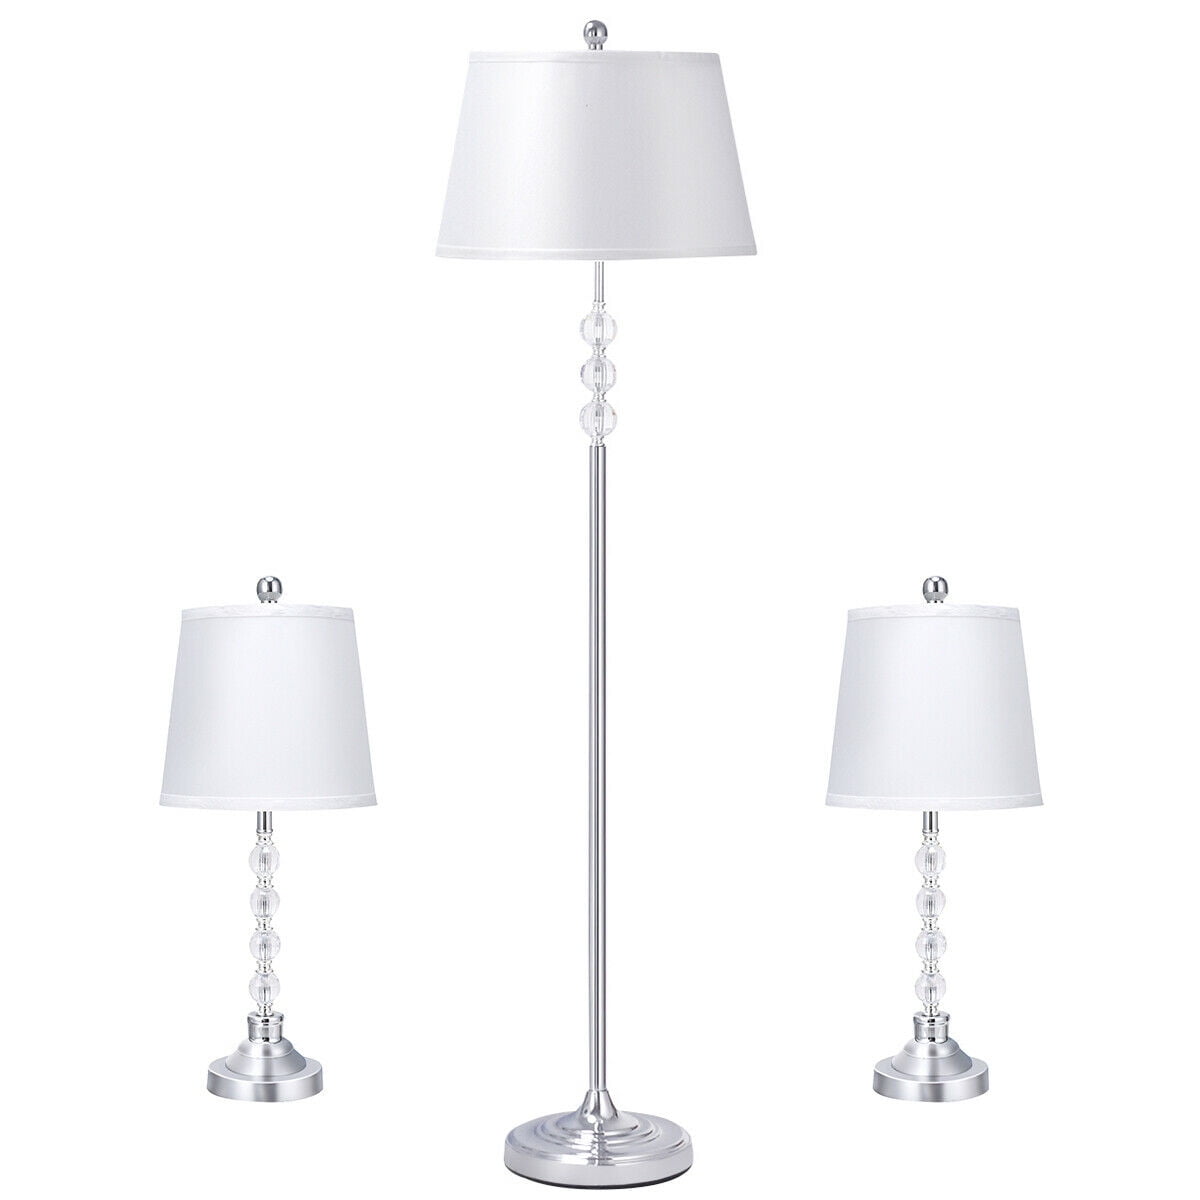 Floor Lamp Chrome Finished Modern Home, Floor And Table Lamp Sets Contemporary